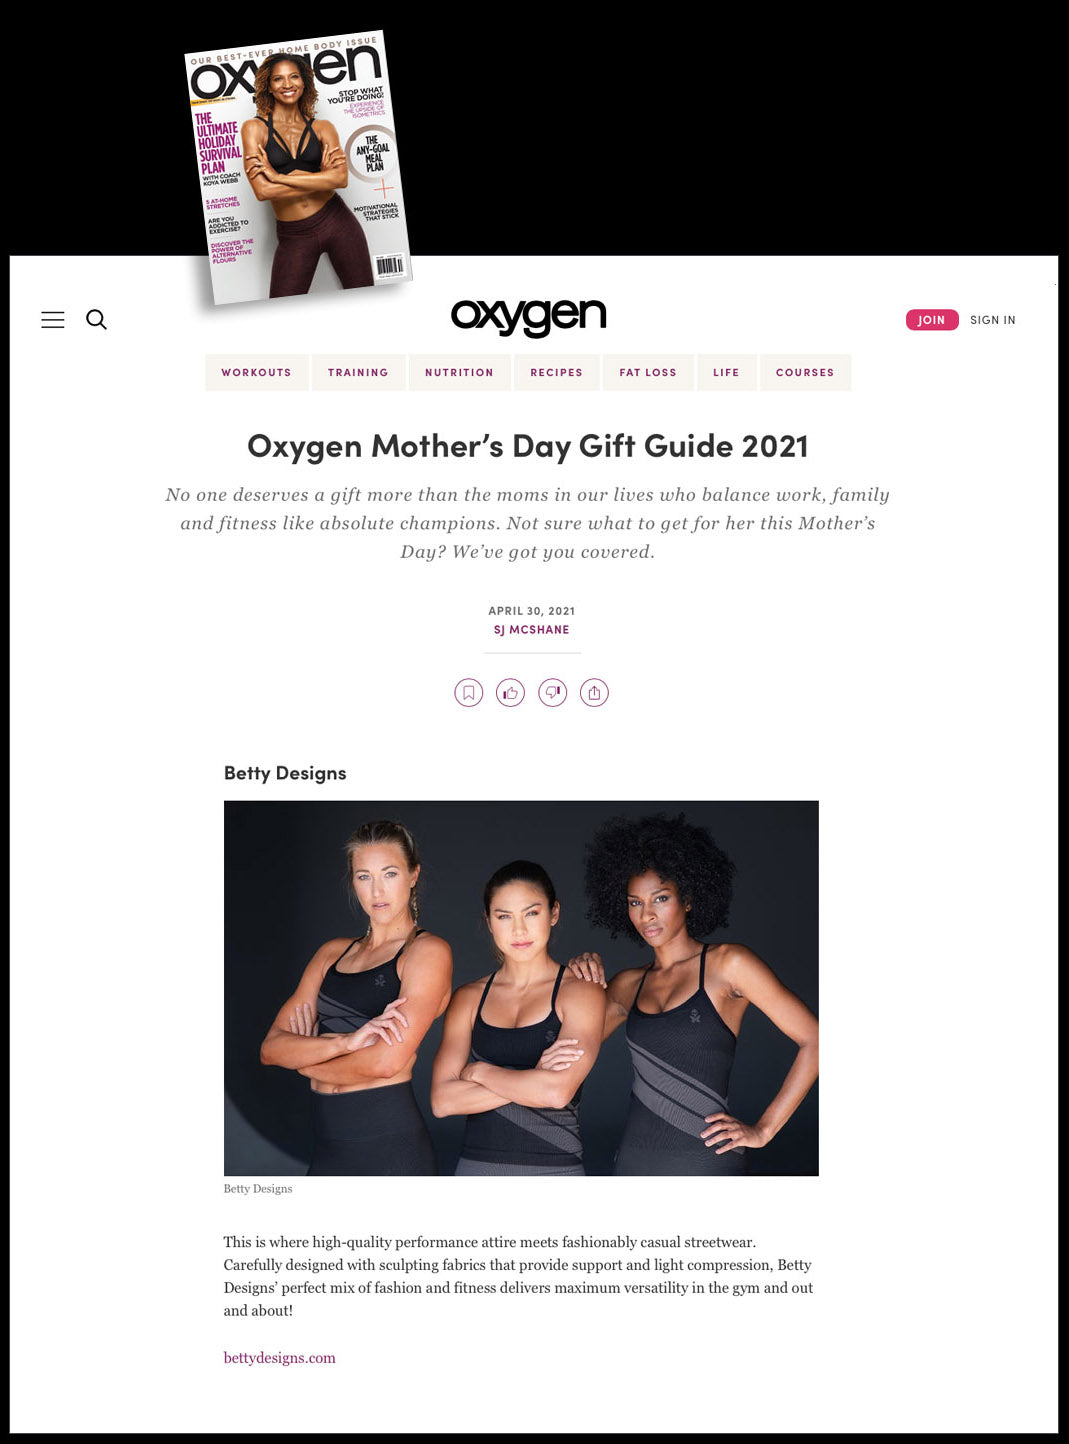 BDLAB FEATURED IN THE OXYGEN MOTHER'S DAY GIFT GUIDE 2021